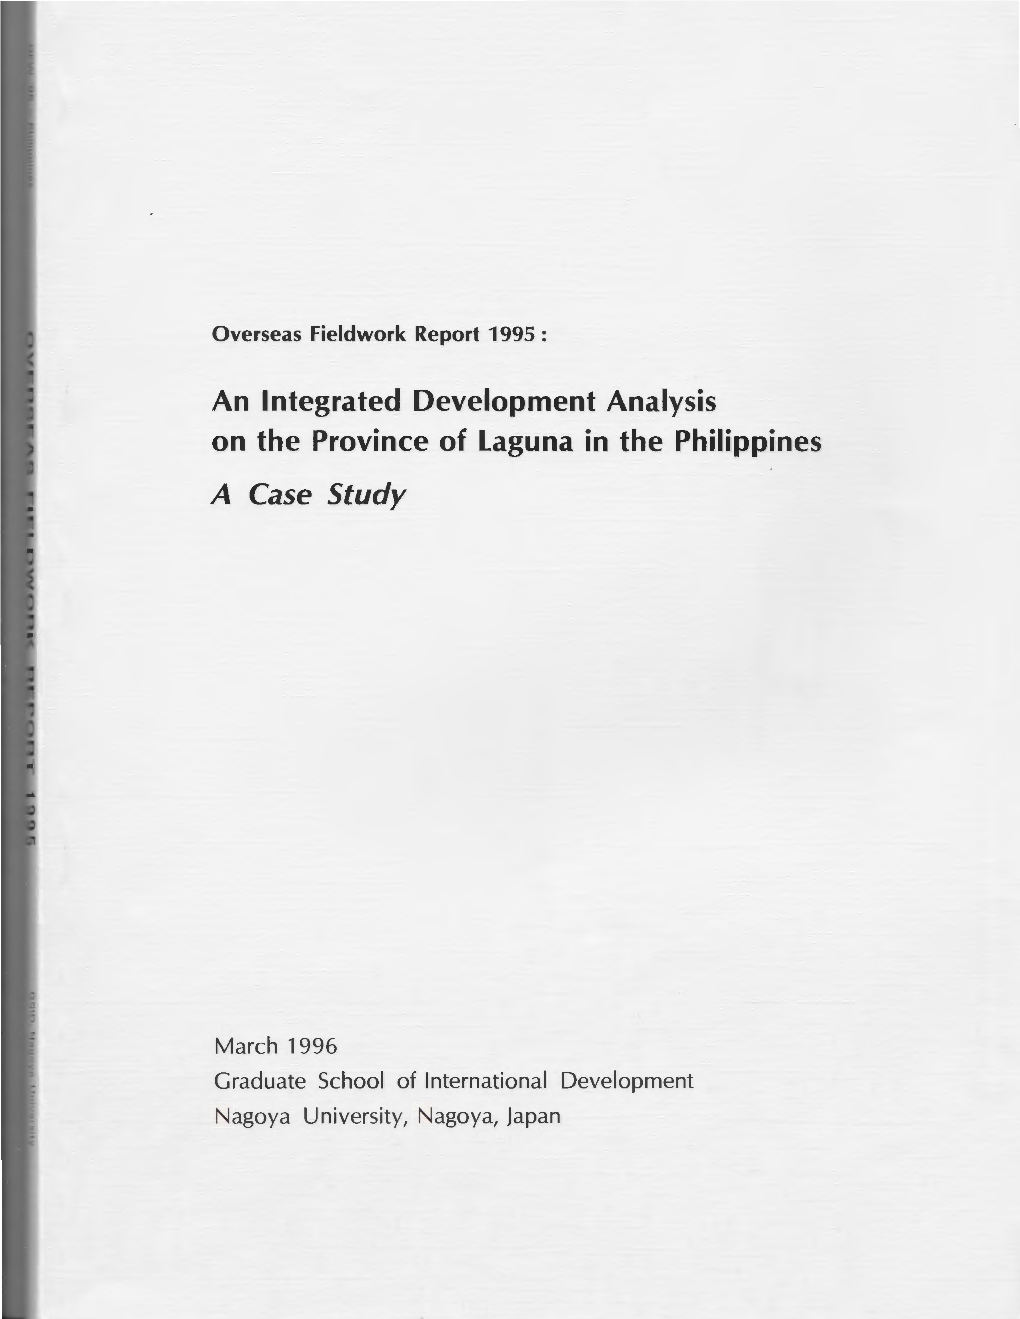 An Integrated Development Analysis on the Province of Laguna in the Philippines a Case Study